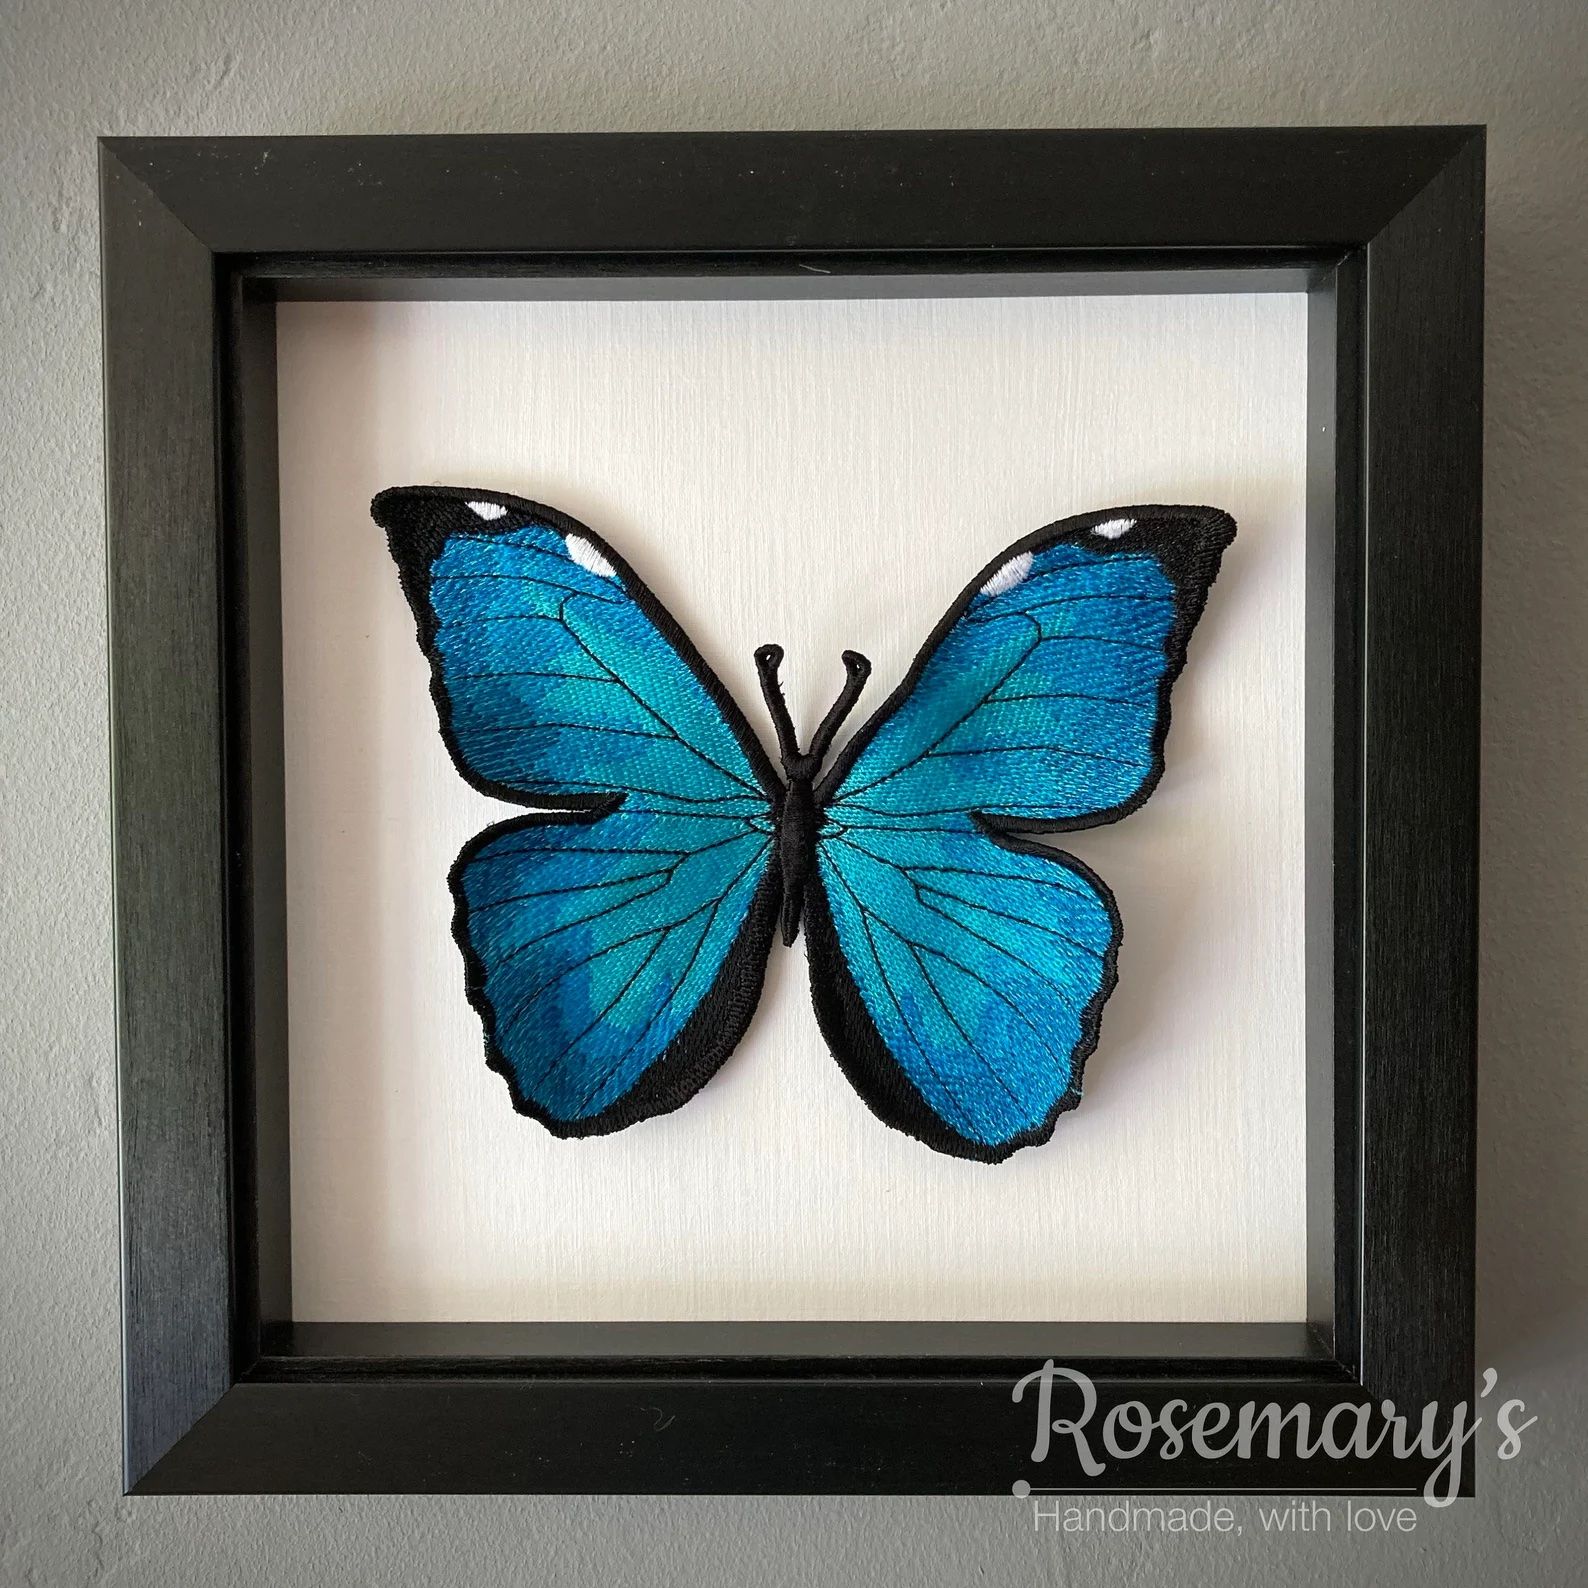 a 3d embroidered blue butterfly in a shadowbox